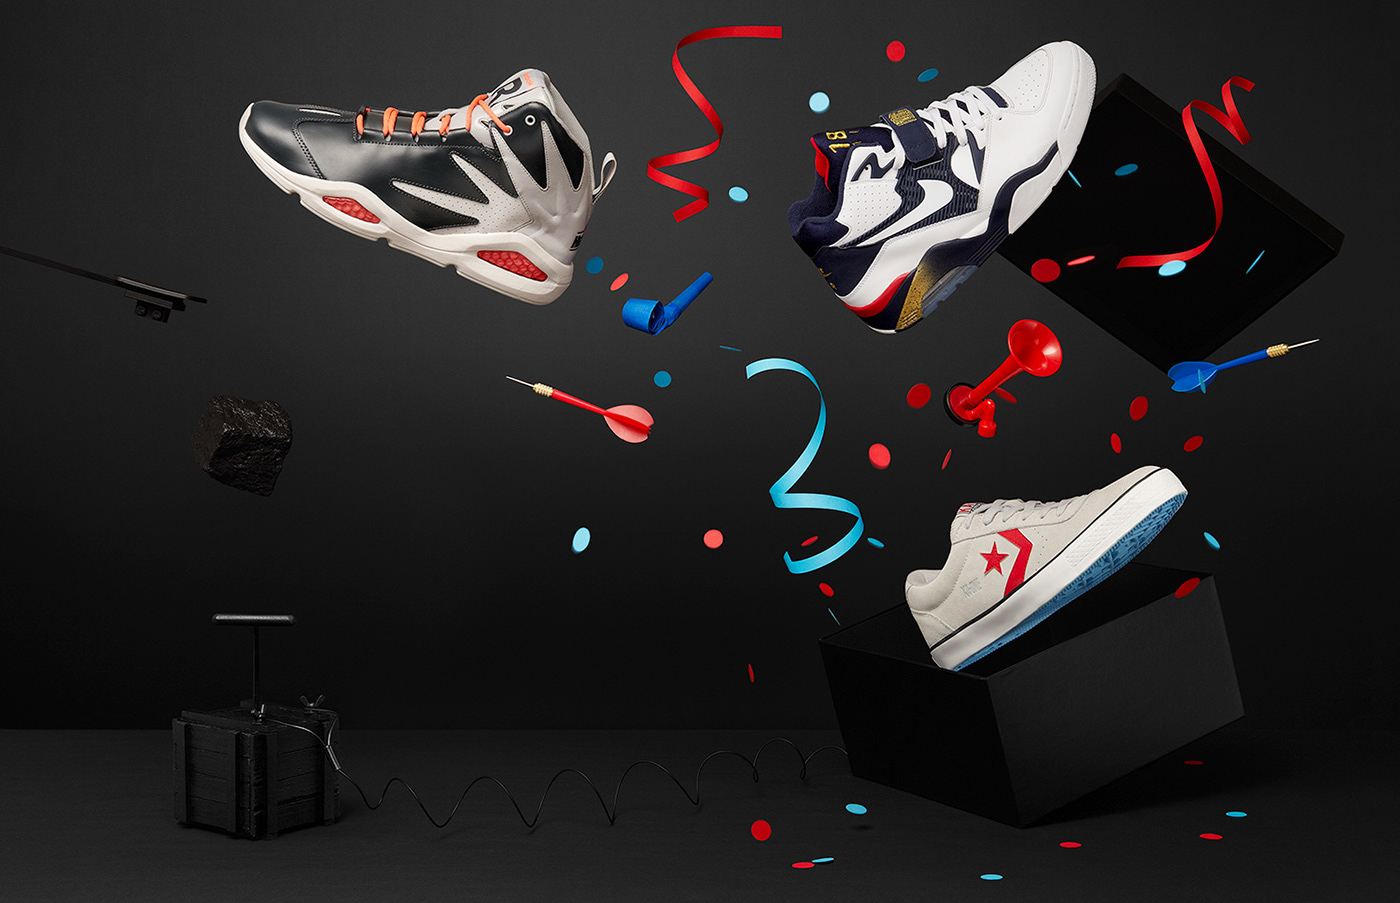 editorial tactile installation sneakers Nike converse chain-reaction setdesign still life